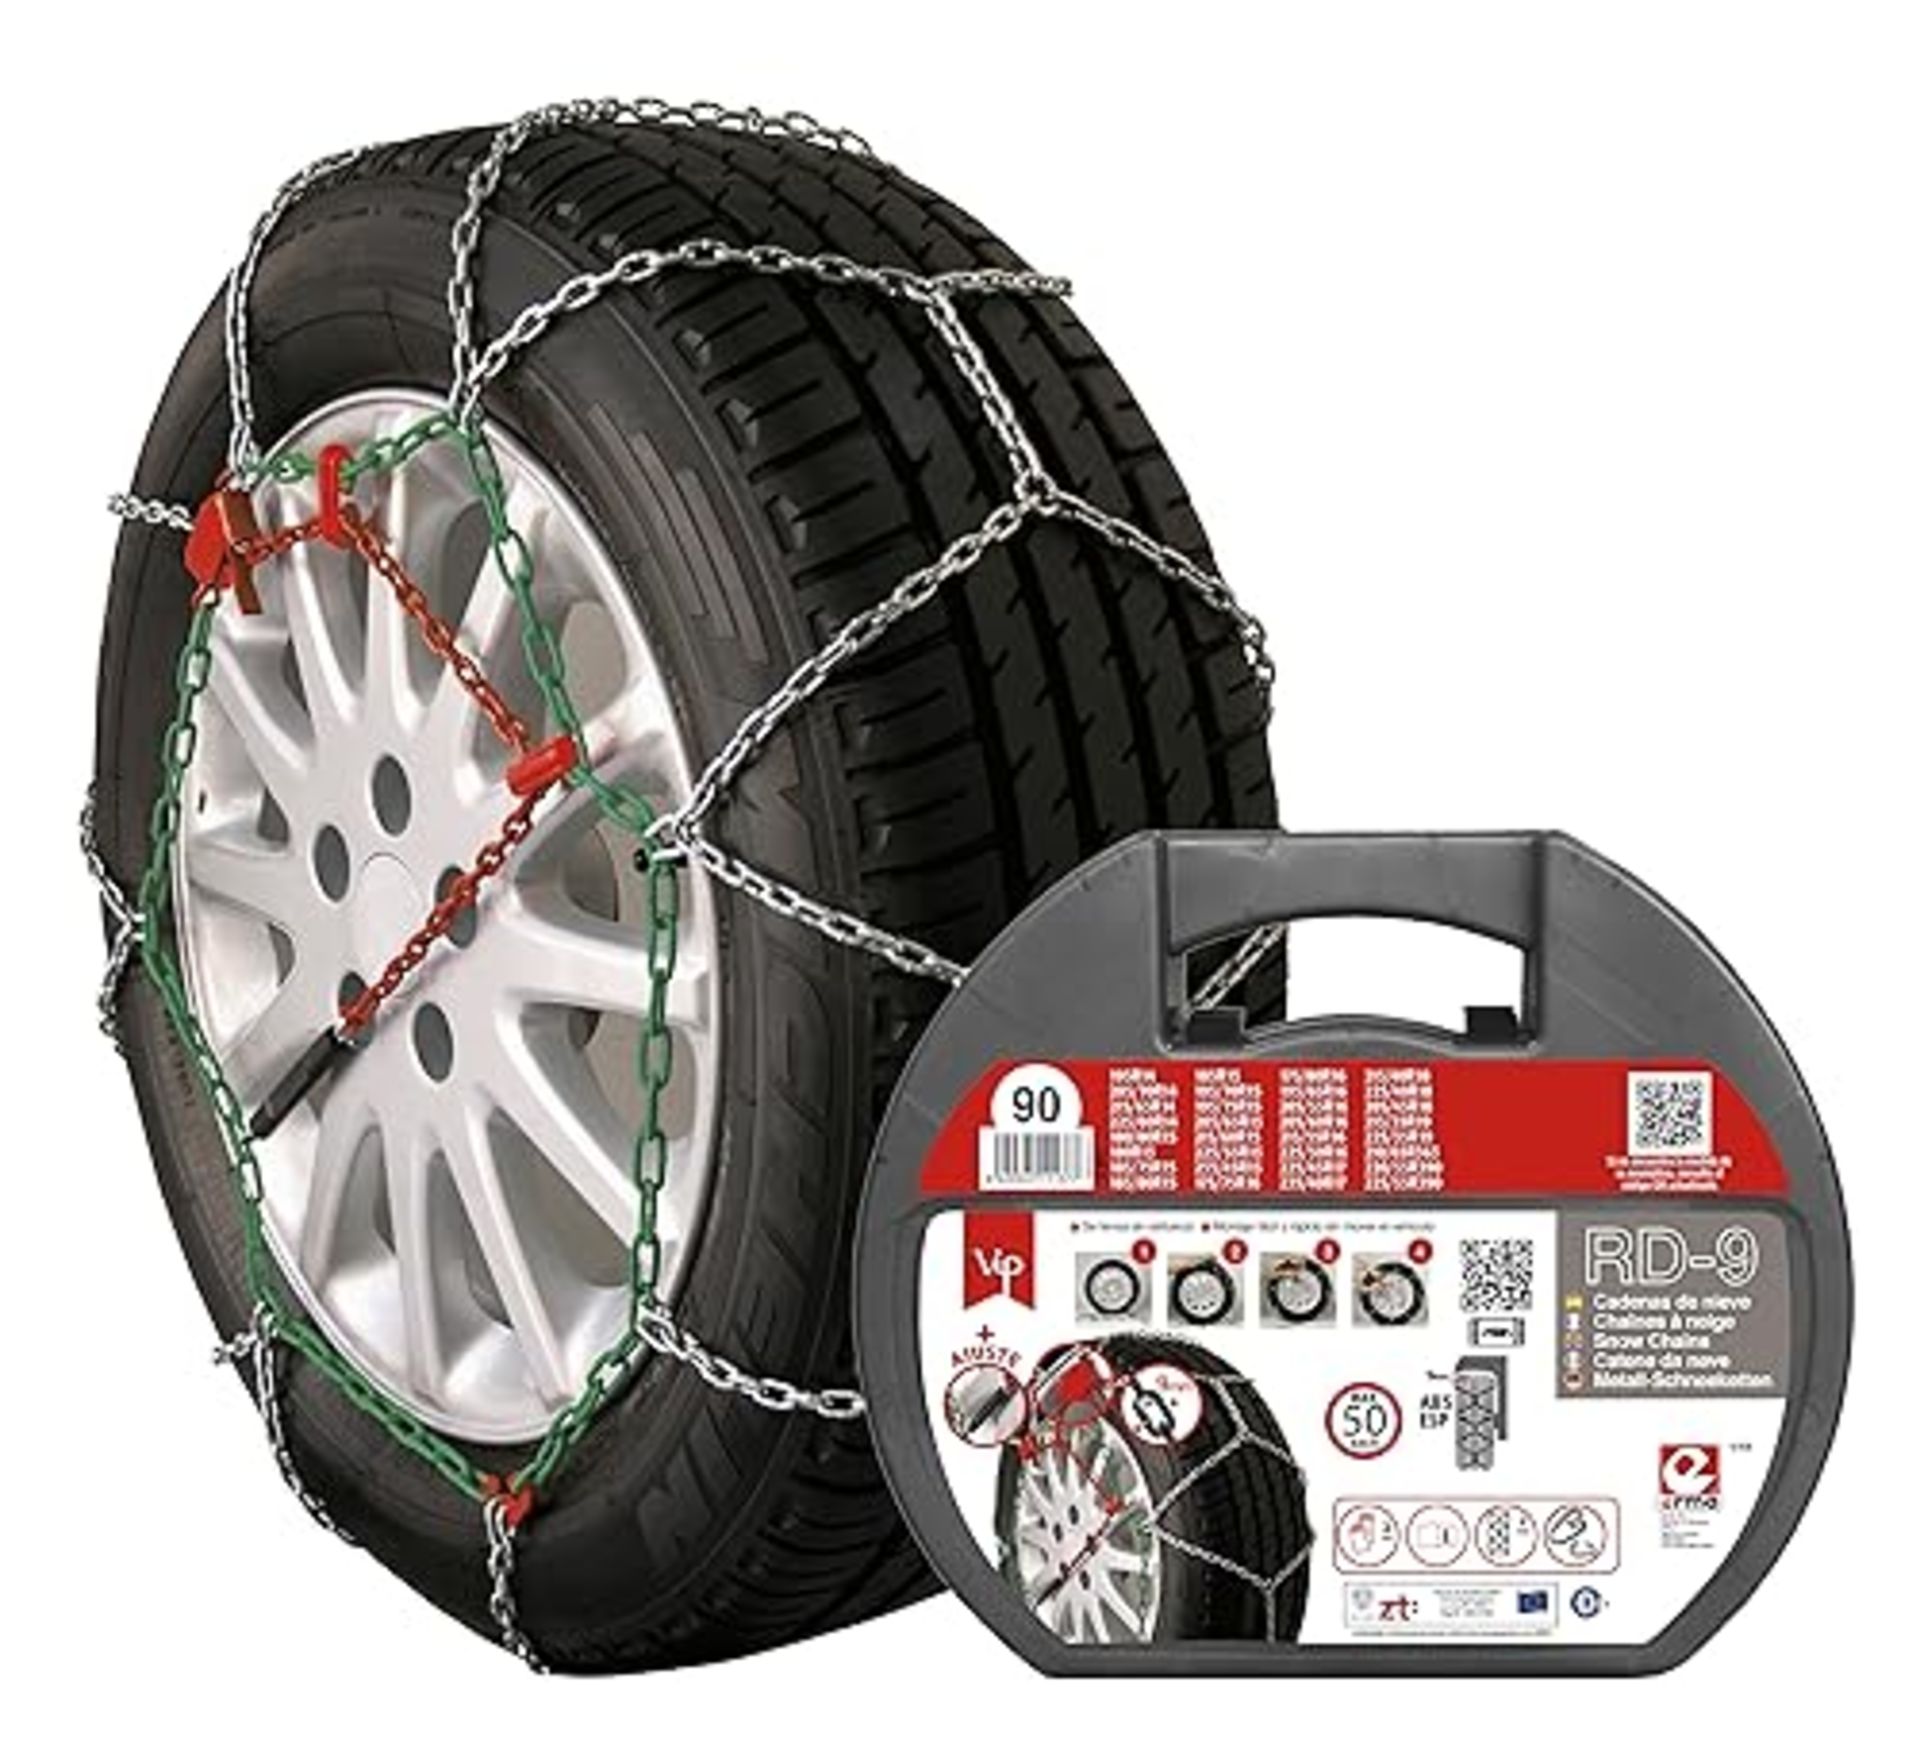 RD9 - Metal snow chains, mm, size No. 90, 2 pieces, including gloves.